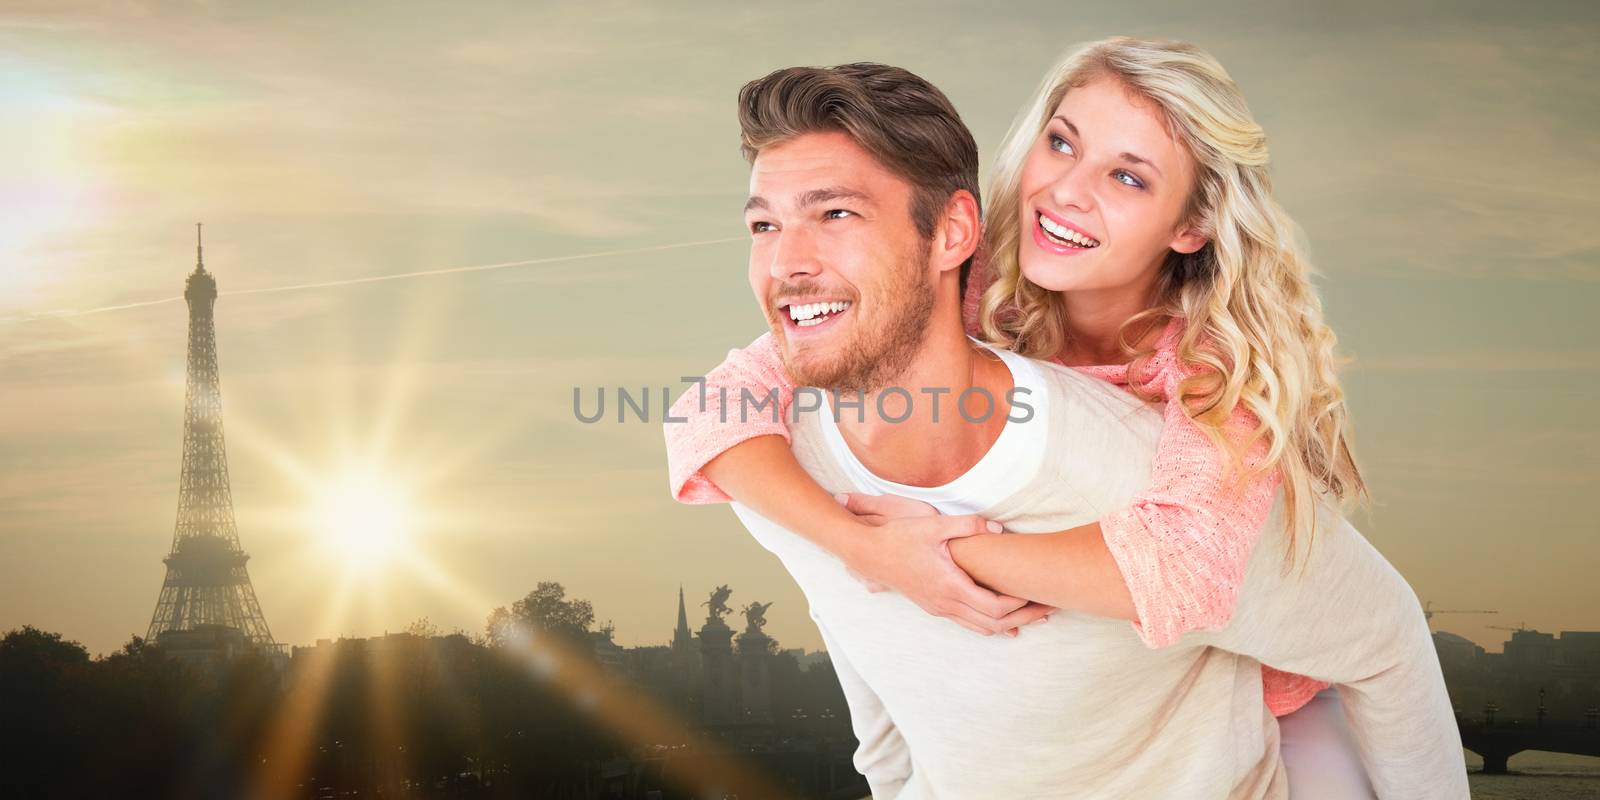 Handsome man giving piggy back to his girlfriend against eiffel tower